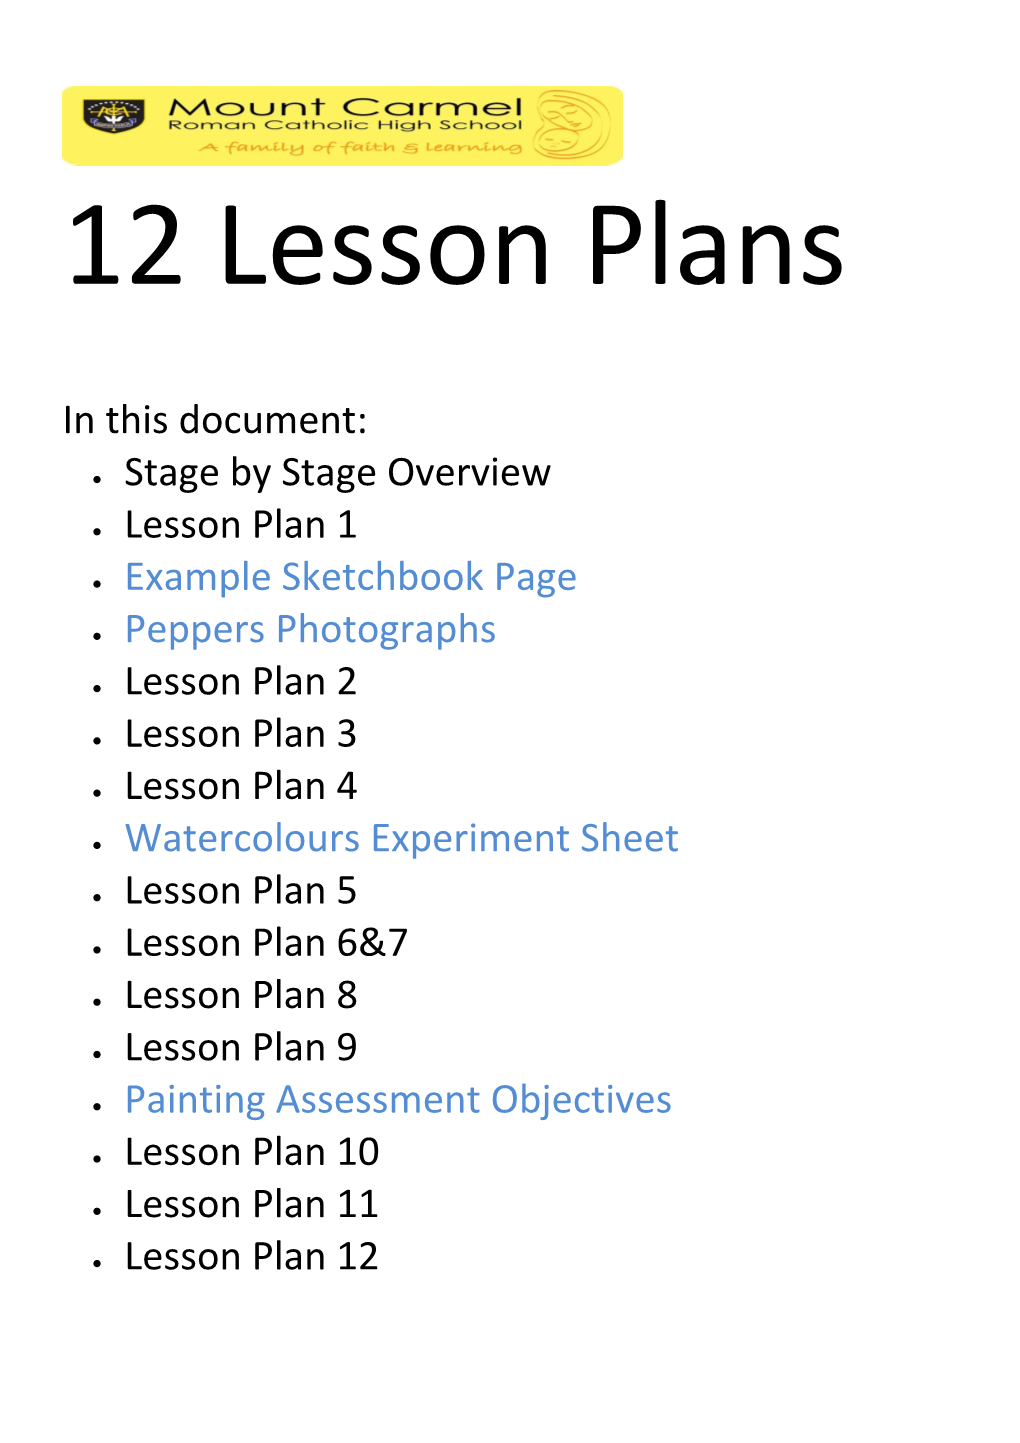 Lesson Plans and Resources